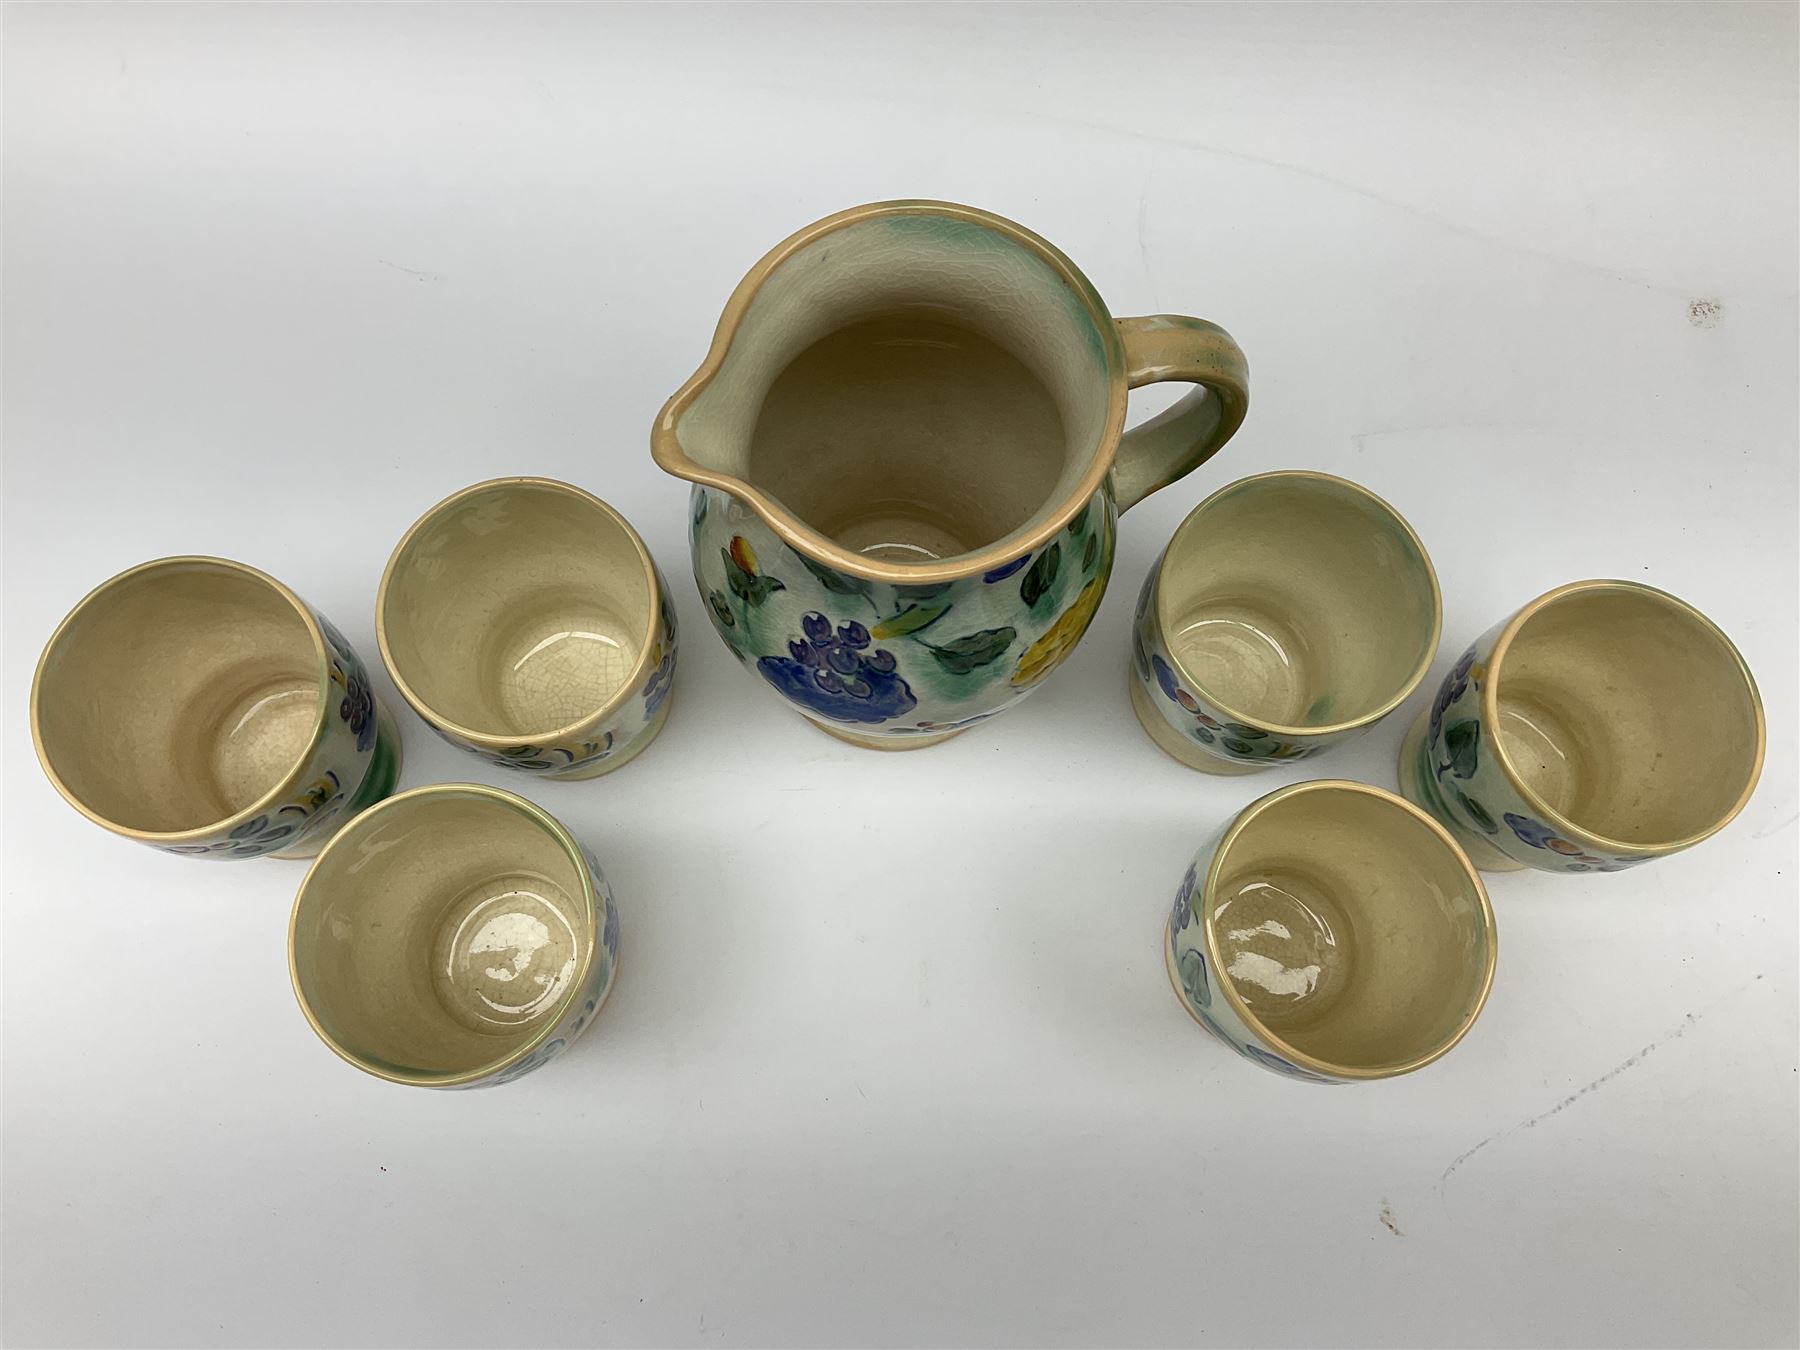 Early 20th century Royal Doulton Brangwyn Ware jug and set of six beakers - Image 6 of 7